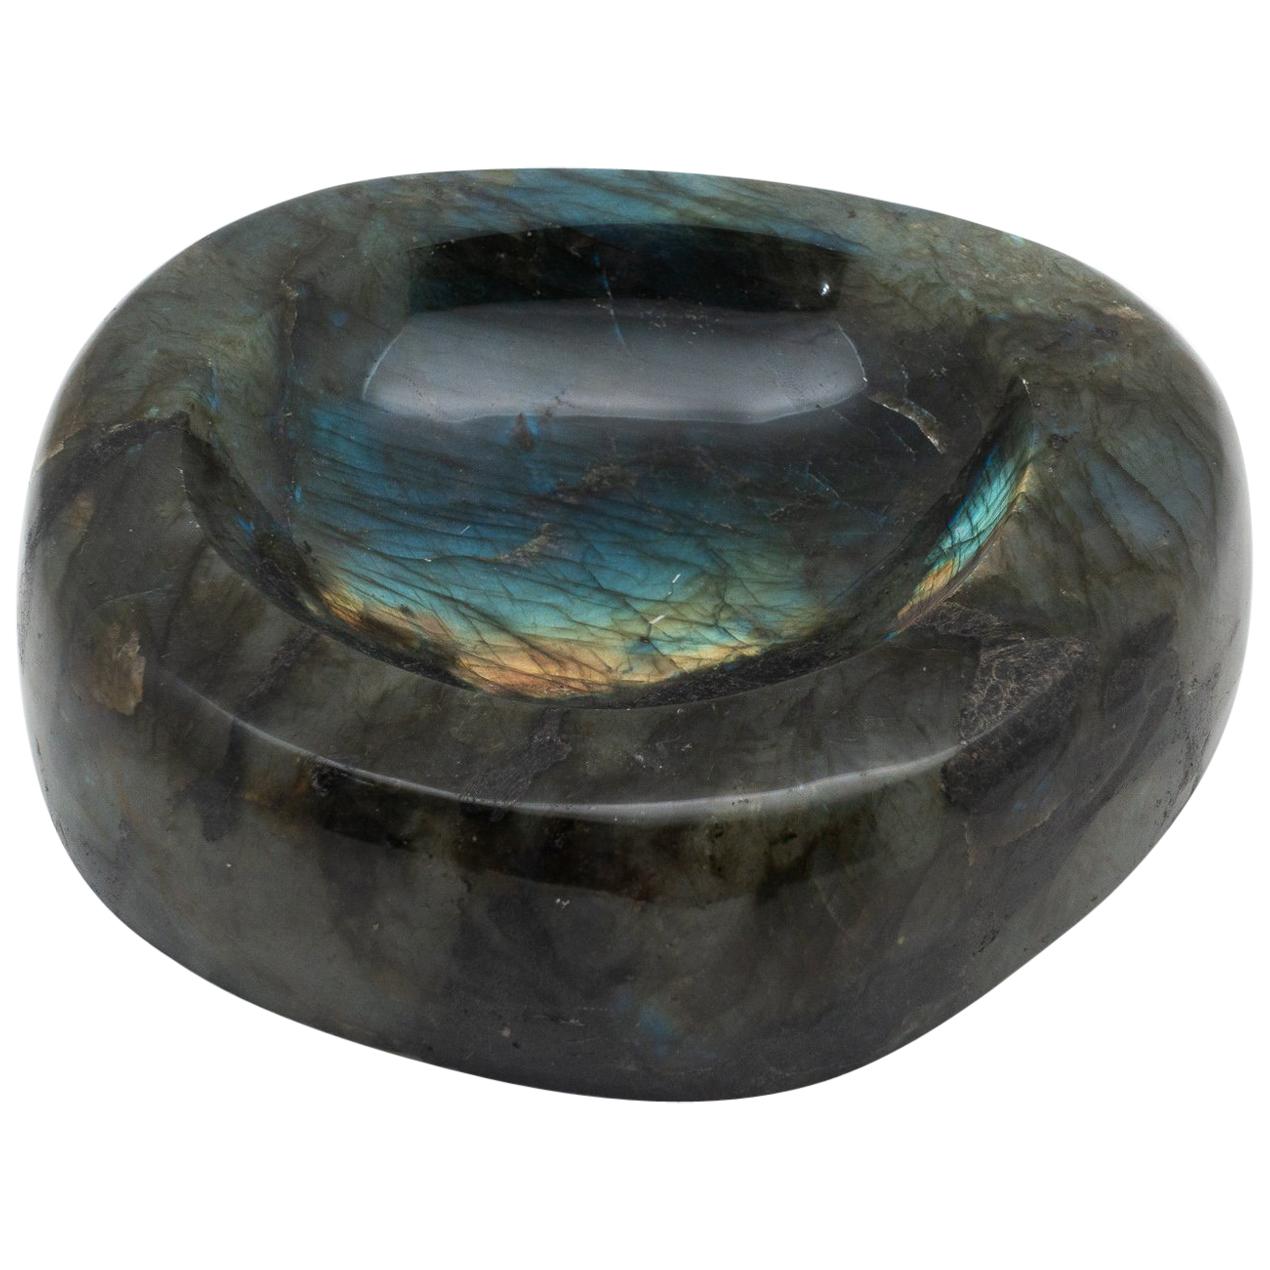 Labradorite Vide Poche Bowl, Rare and Large in Size, Hand-Carved in Madagascar